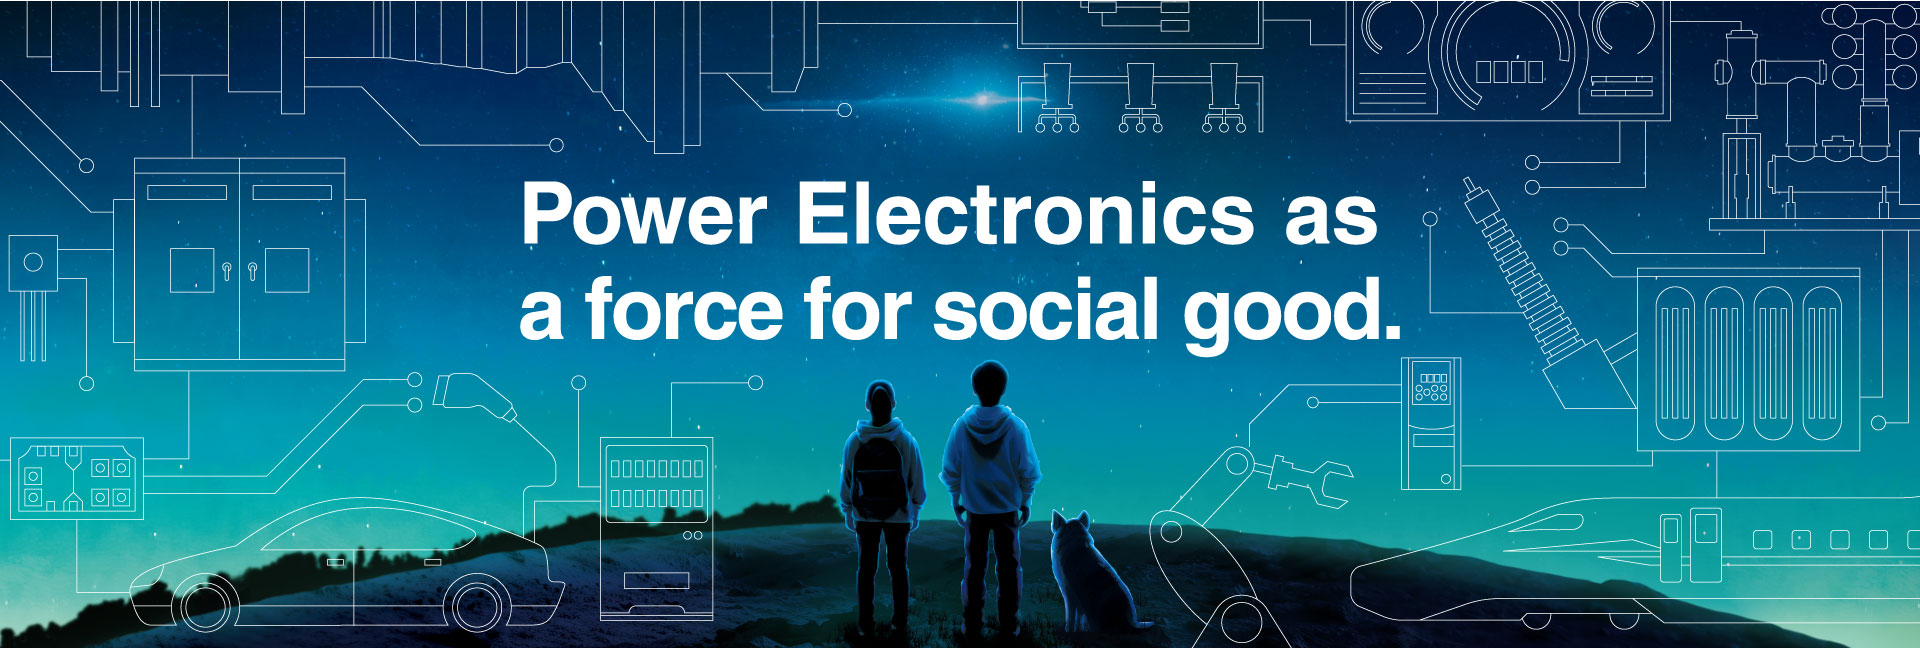 Power Electronics as a force social good. Contributing to the creation of a sustainable society.